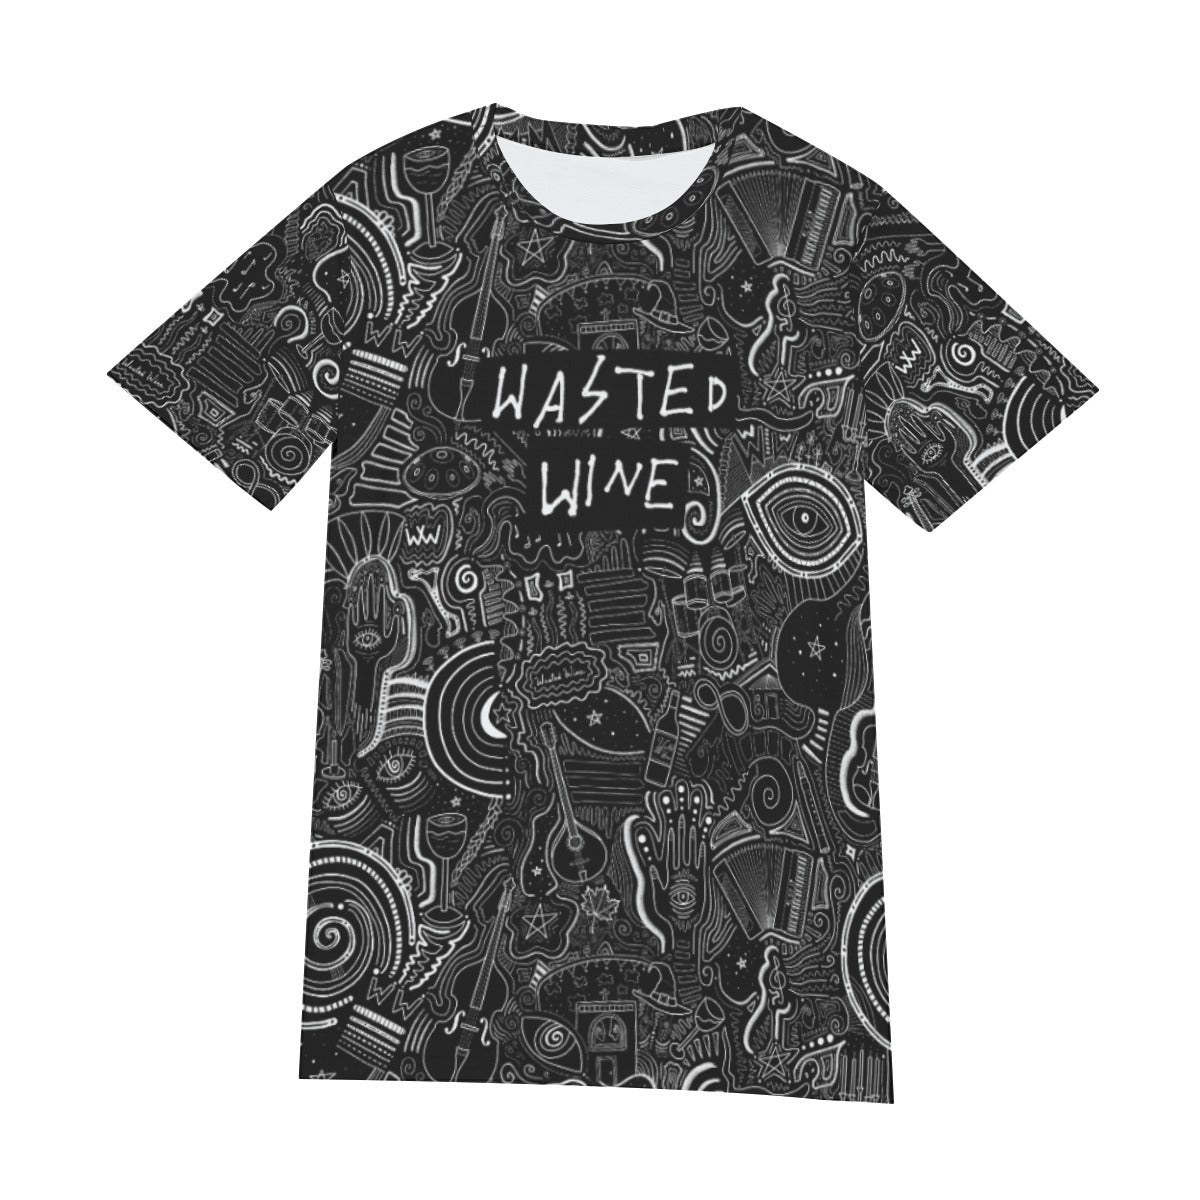 "Wasted Wine" - Men's T-Shirt | T-Shirts | All Around Artsy Fashion